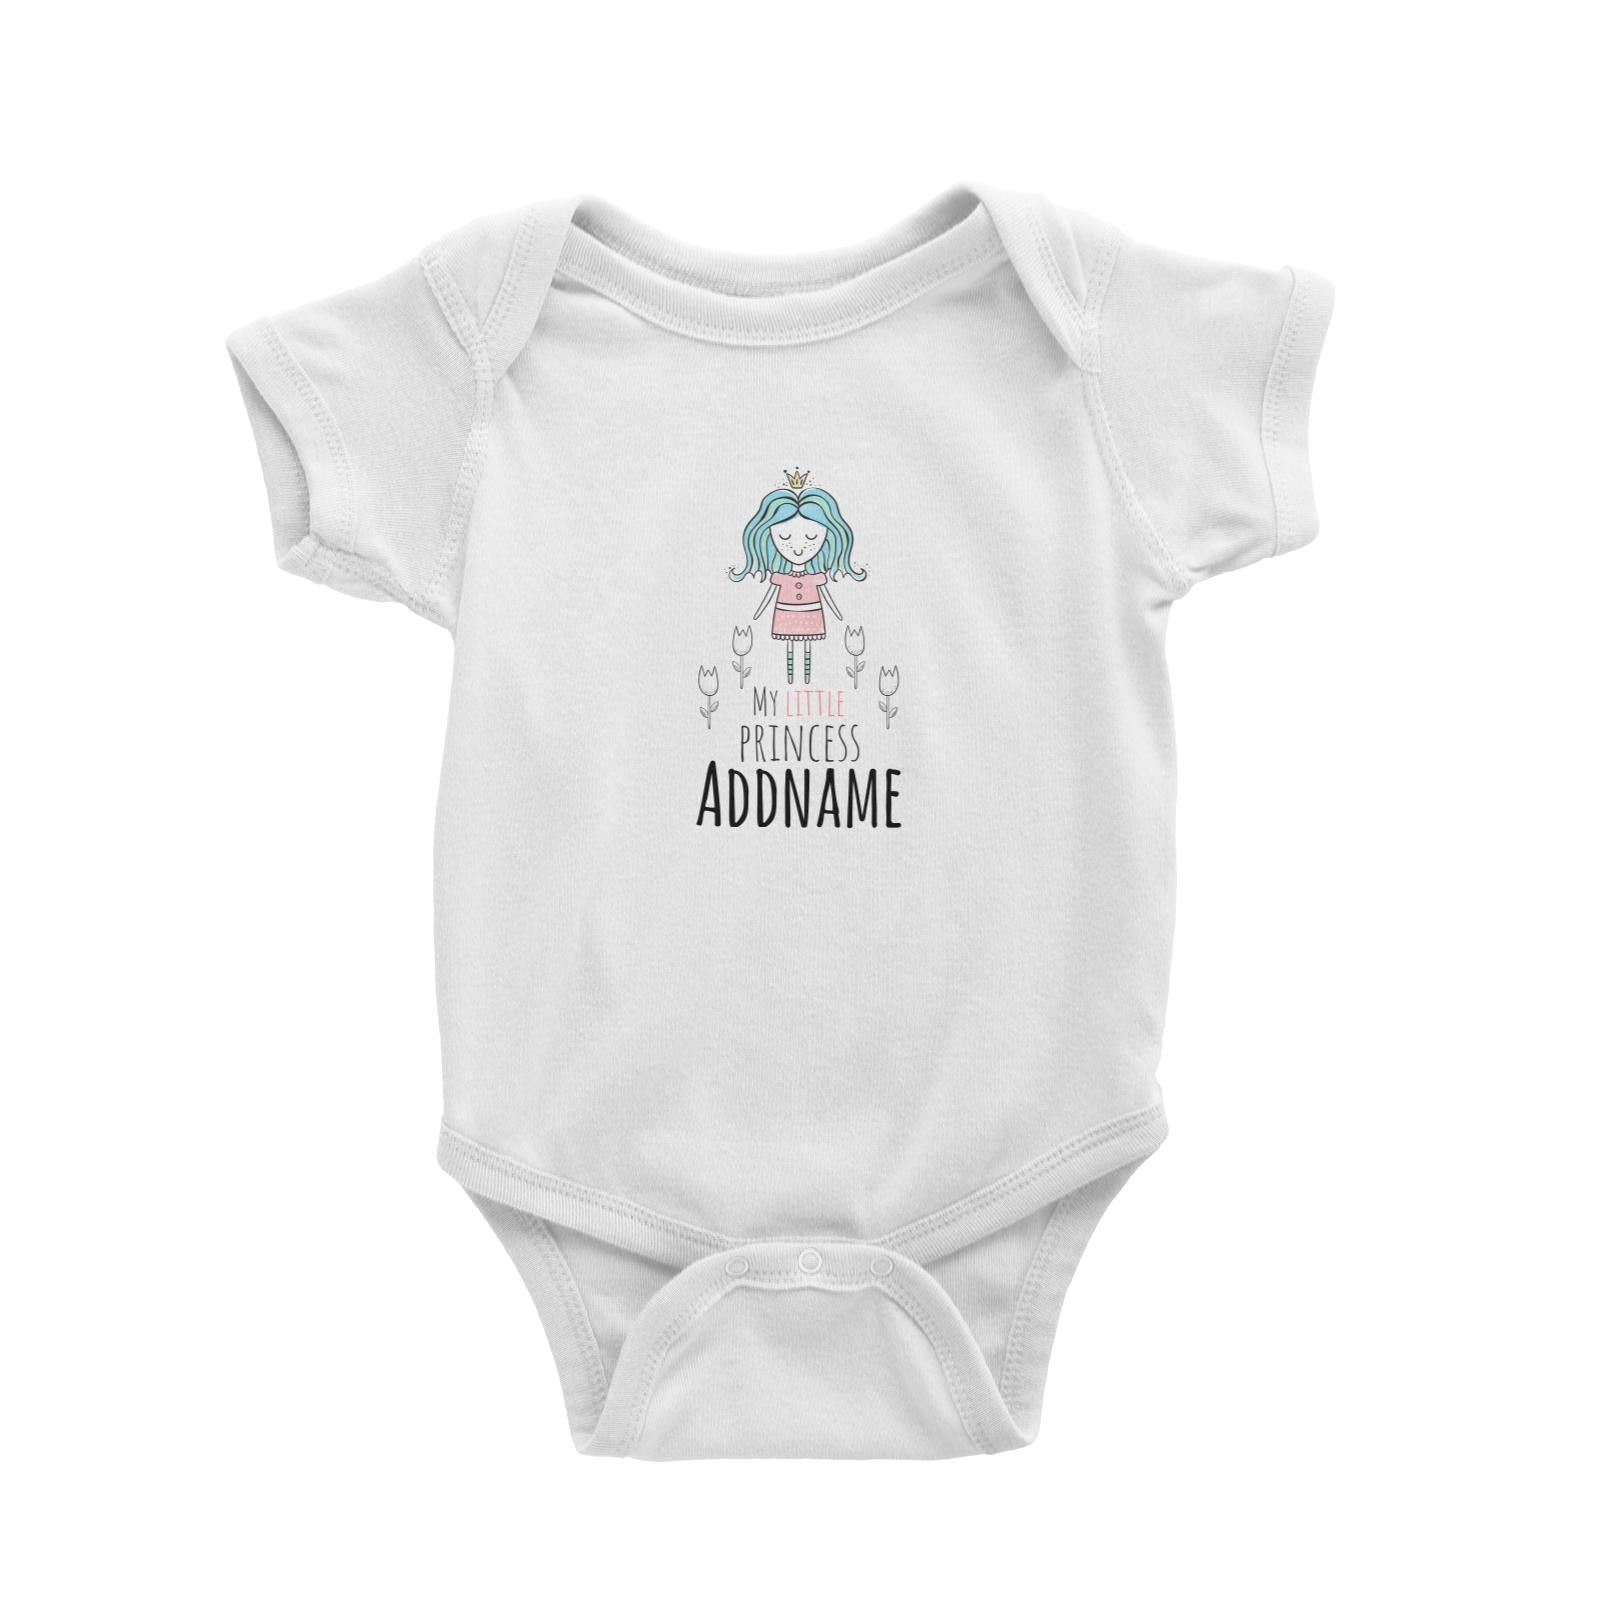 Drawn Dreamy Elements Little Princess Addname Baby Romper